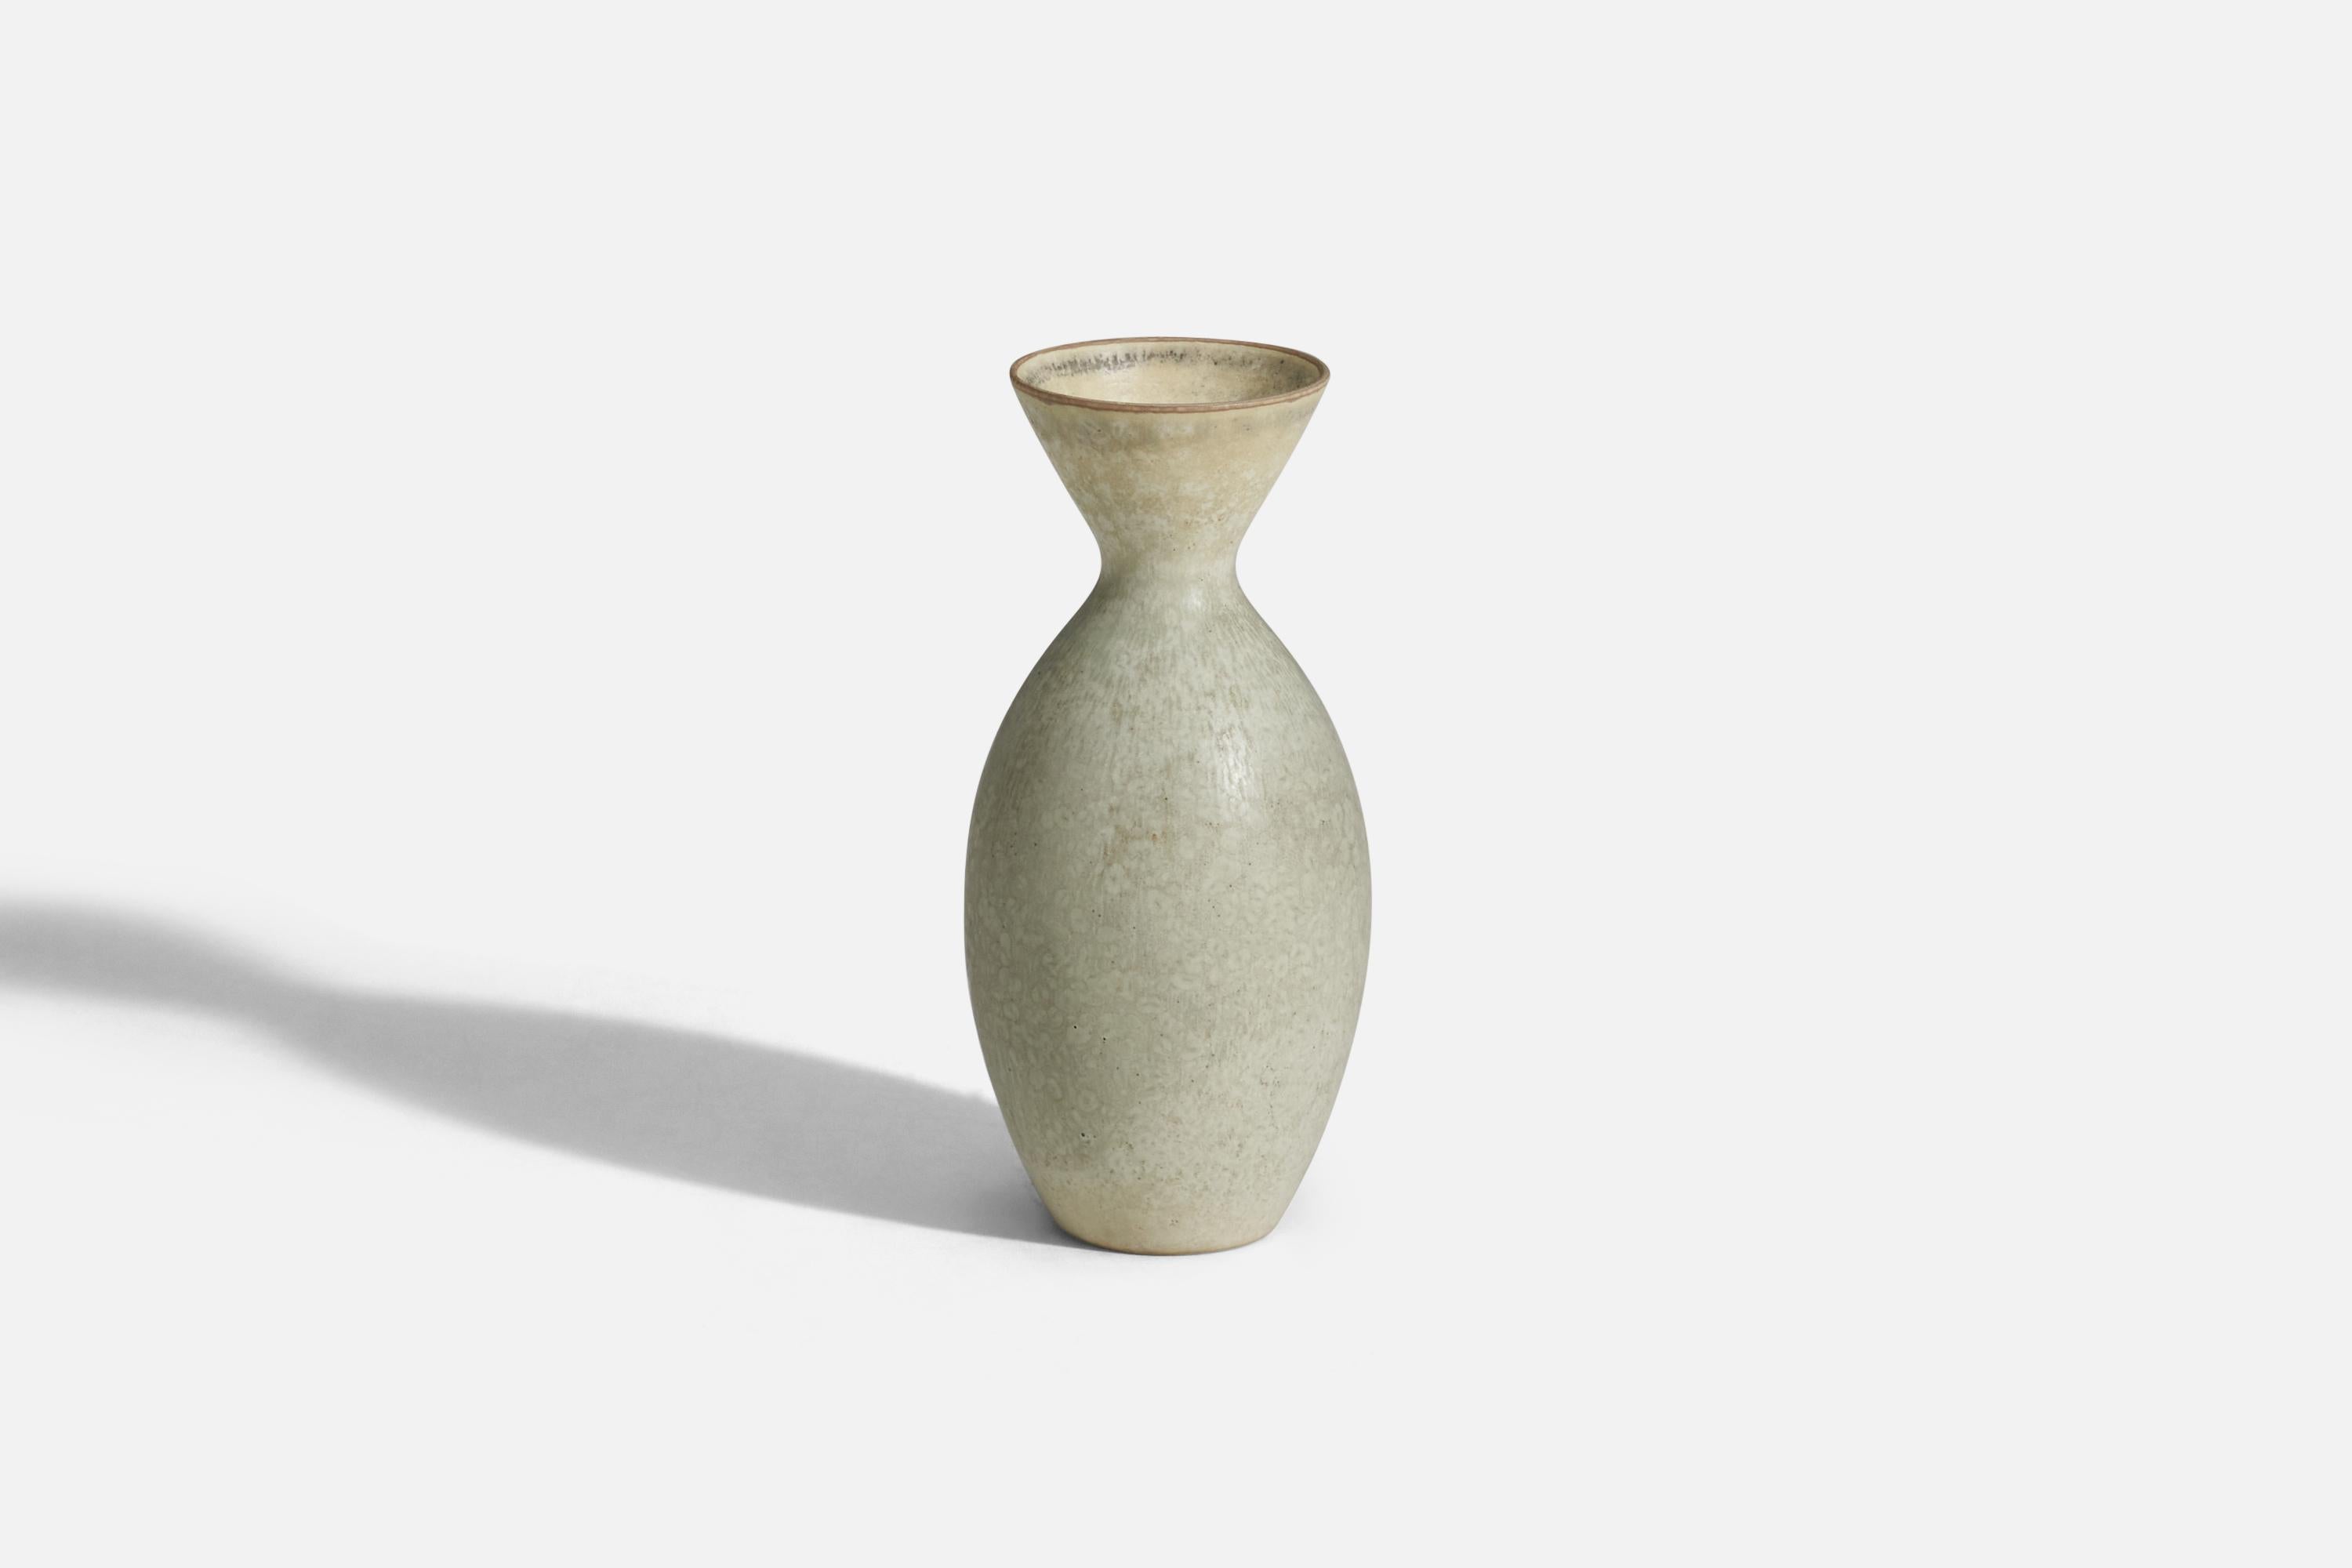 A white glazed stoneware vase designed by Carl-Harry Stålhane and produced by Rörstrand, Sweden, 1960s.